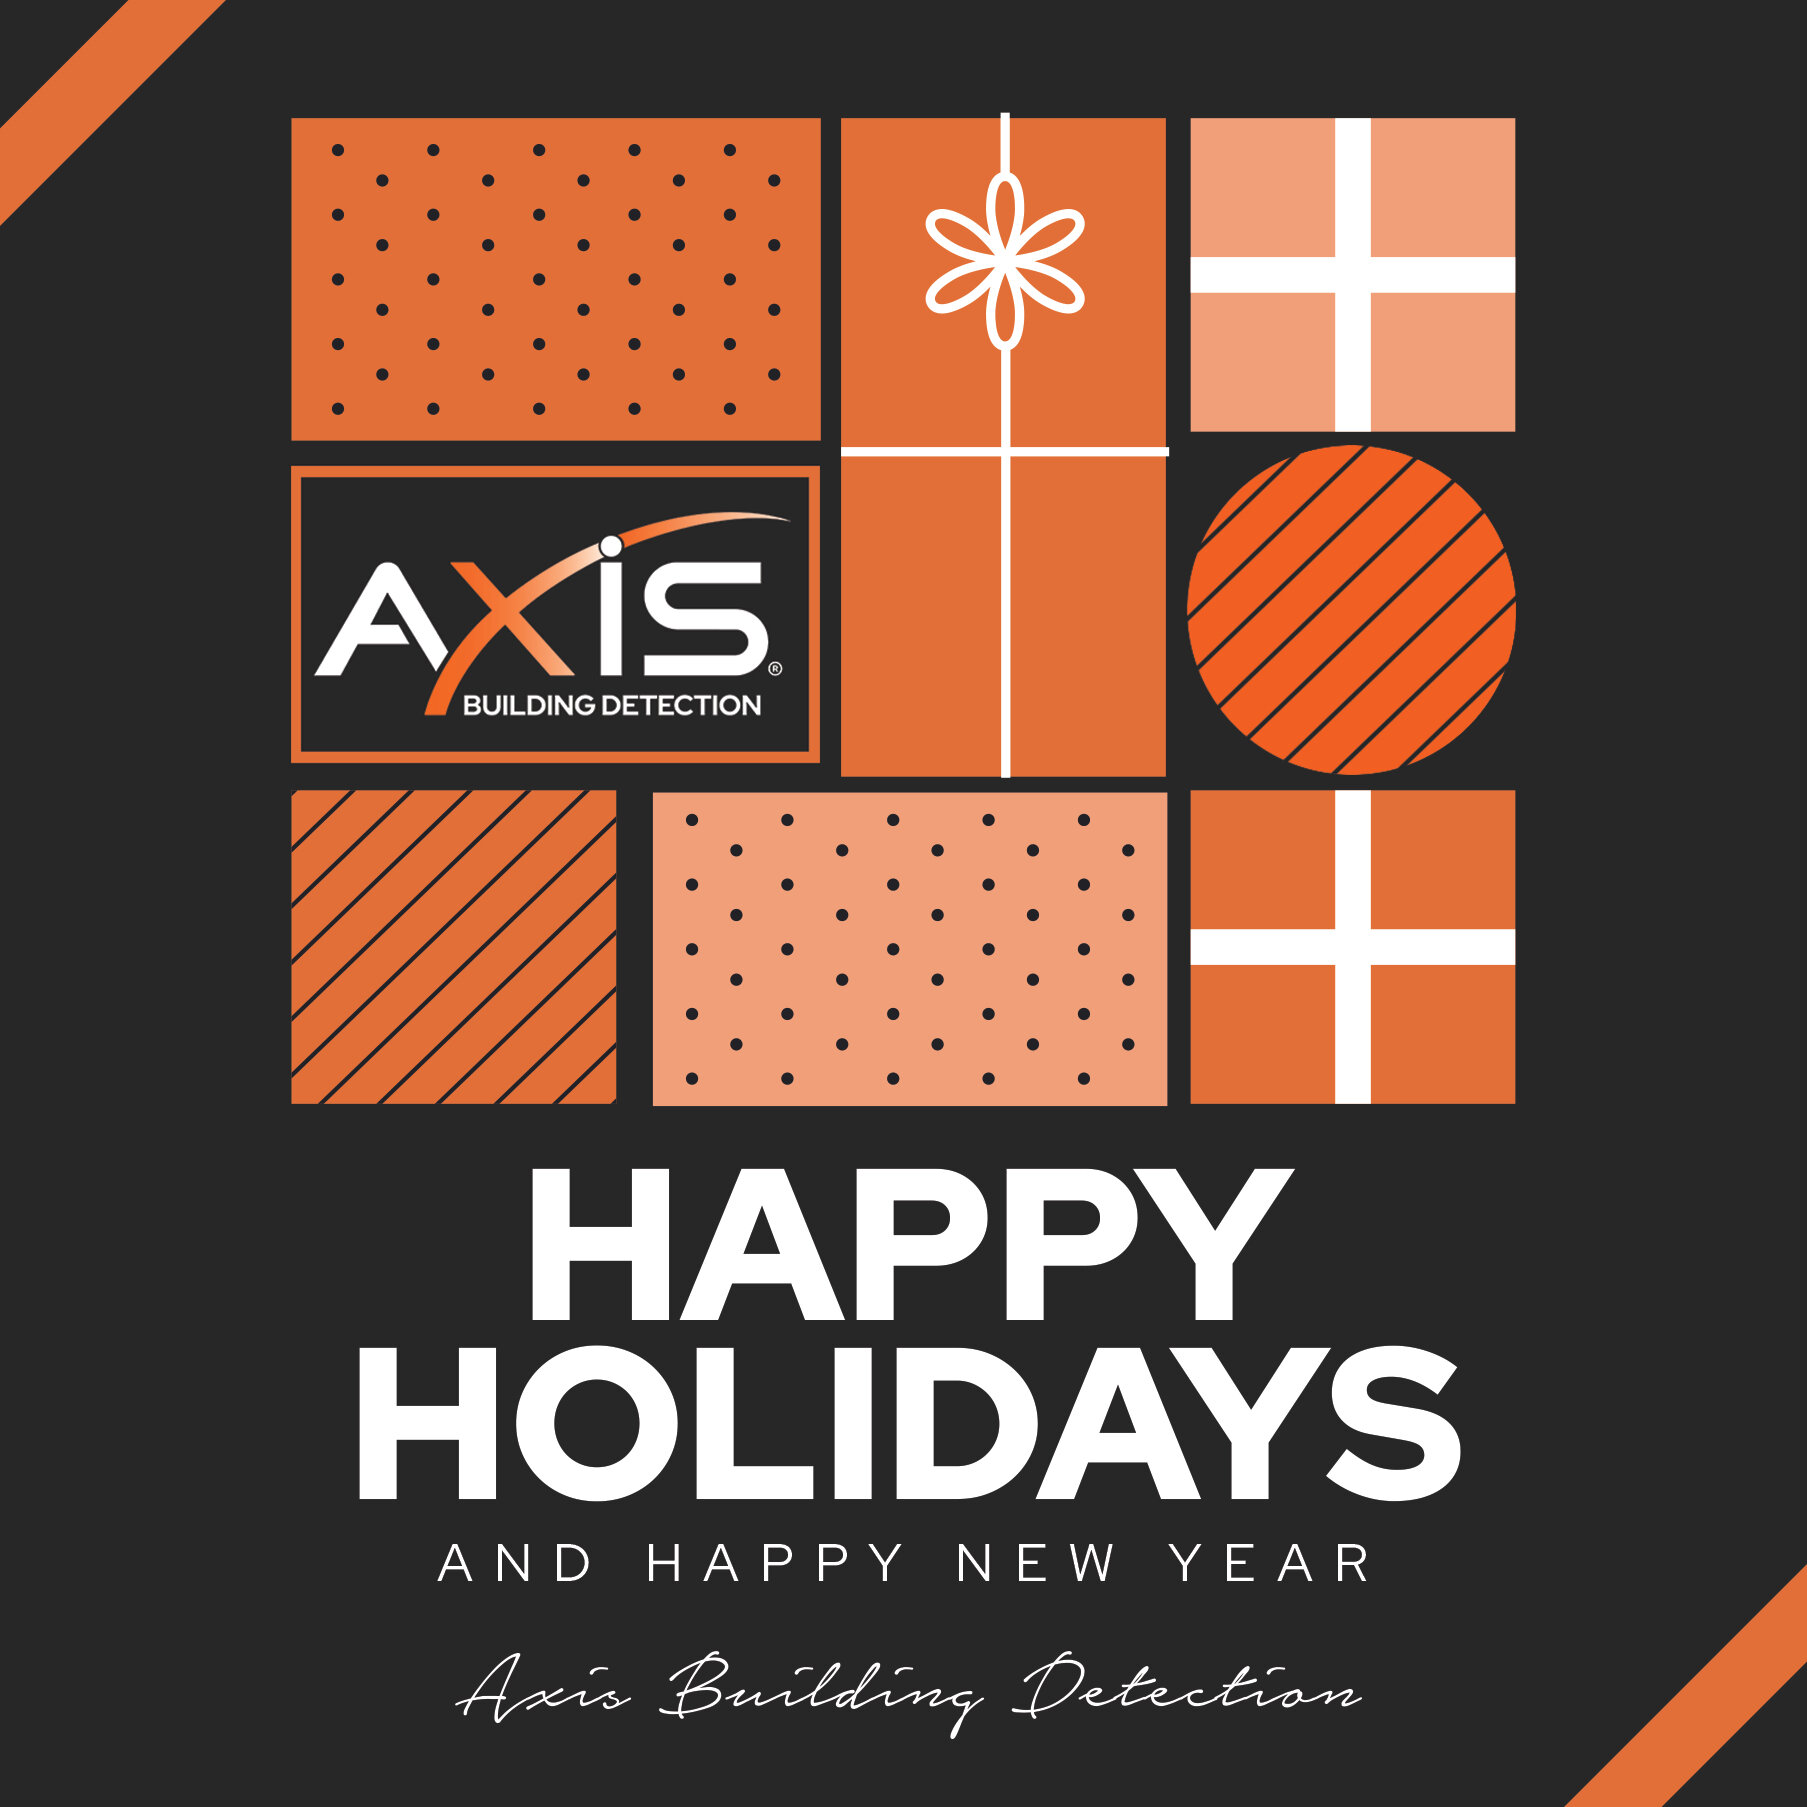 Happy Holidays! We wish you the very best from our Axis Building Detection family to yours.